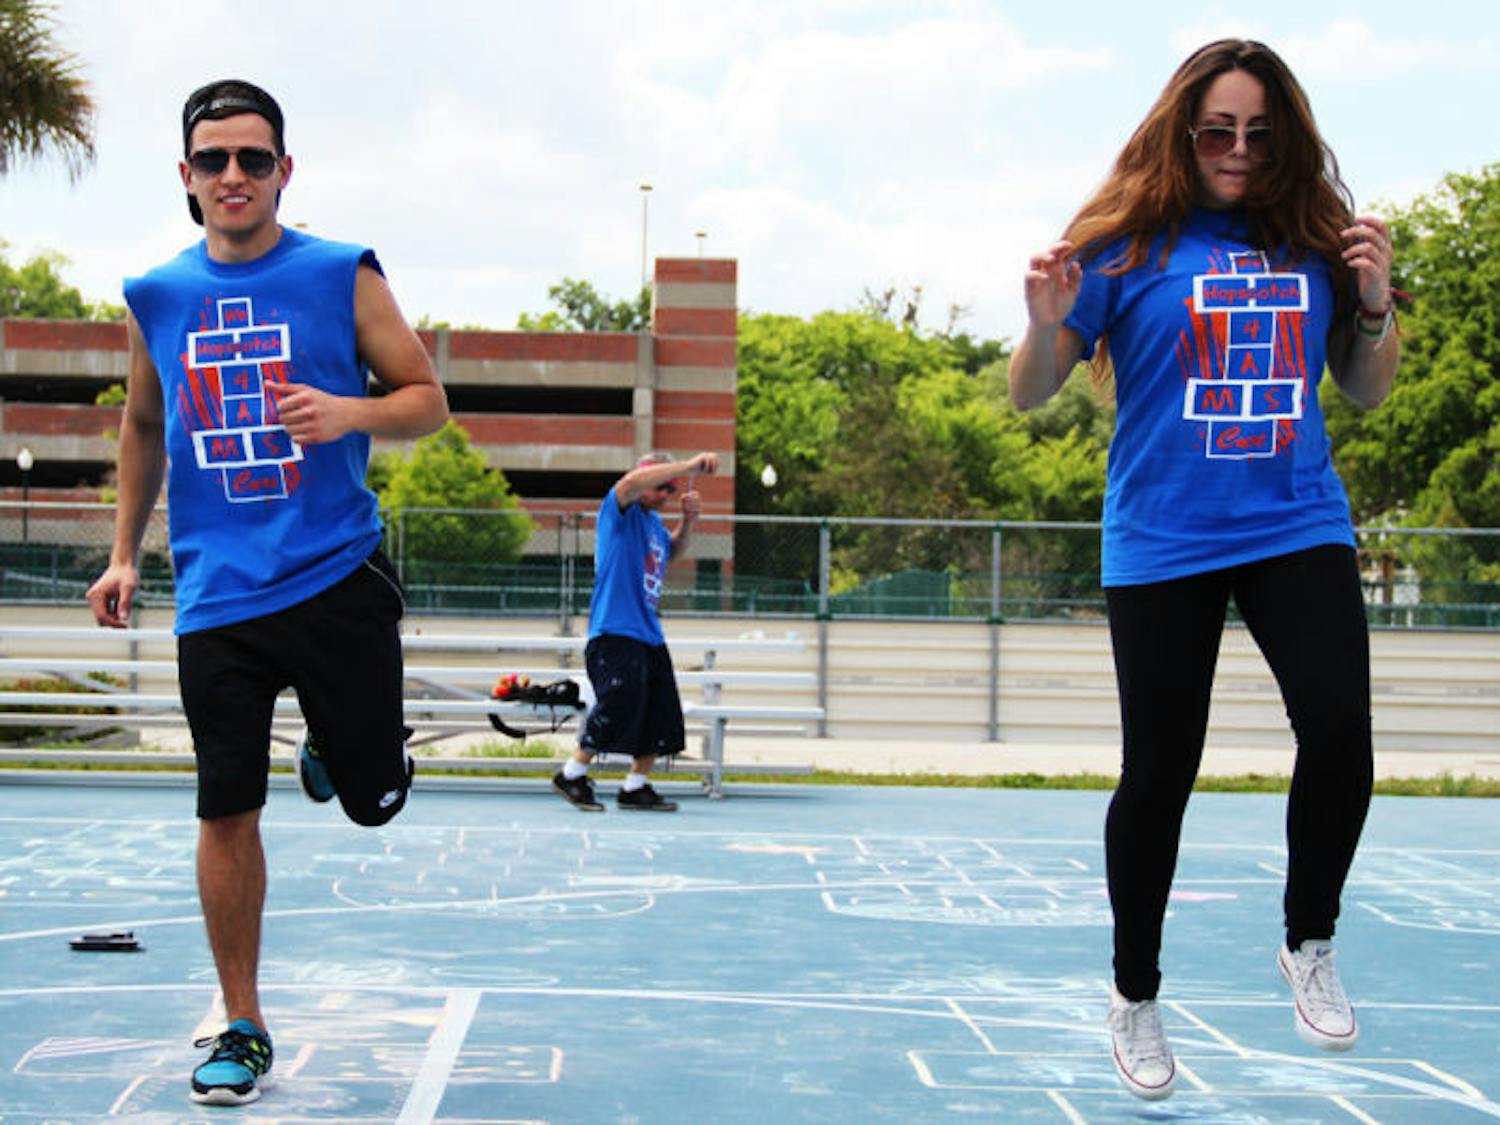 Alejandro Saenz, 19, and Sophia Hannabergh, 19, hopscotch at UF’s Hopping 4 A Cure tournament at the Broward Hall Outdoor Recreation Complex on Sunday afternoon.